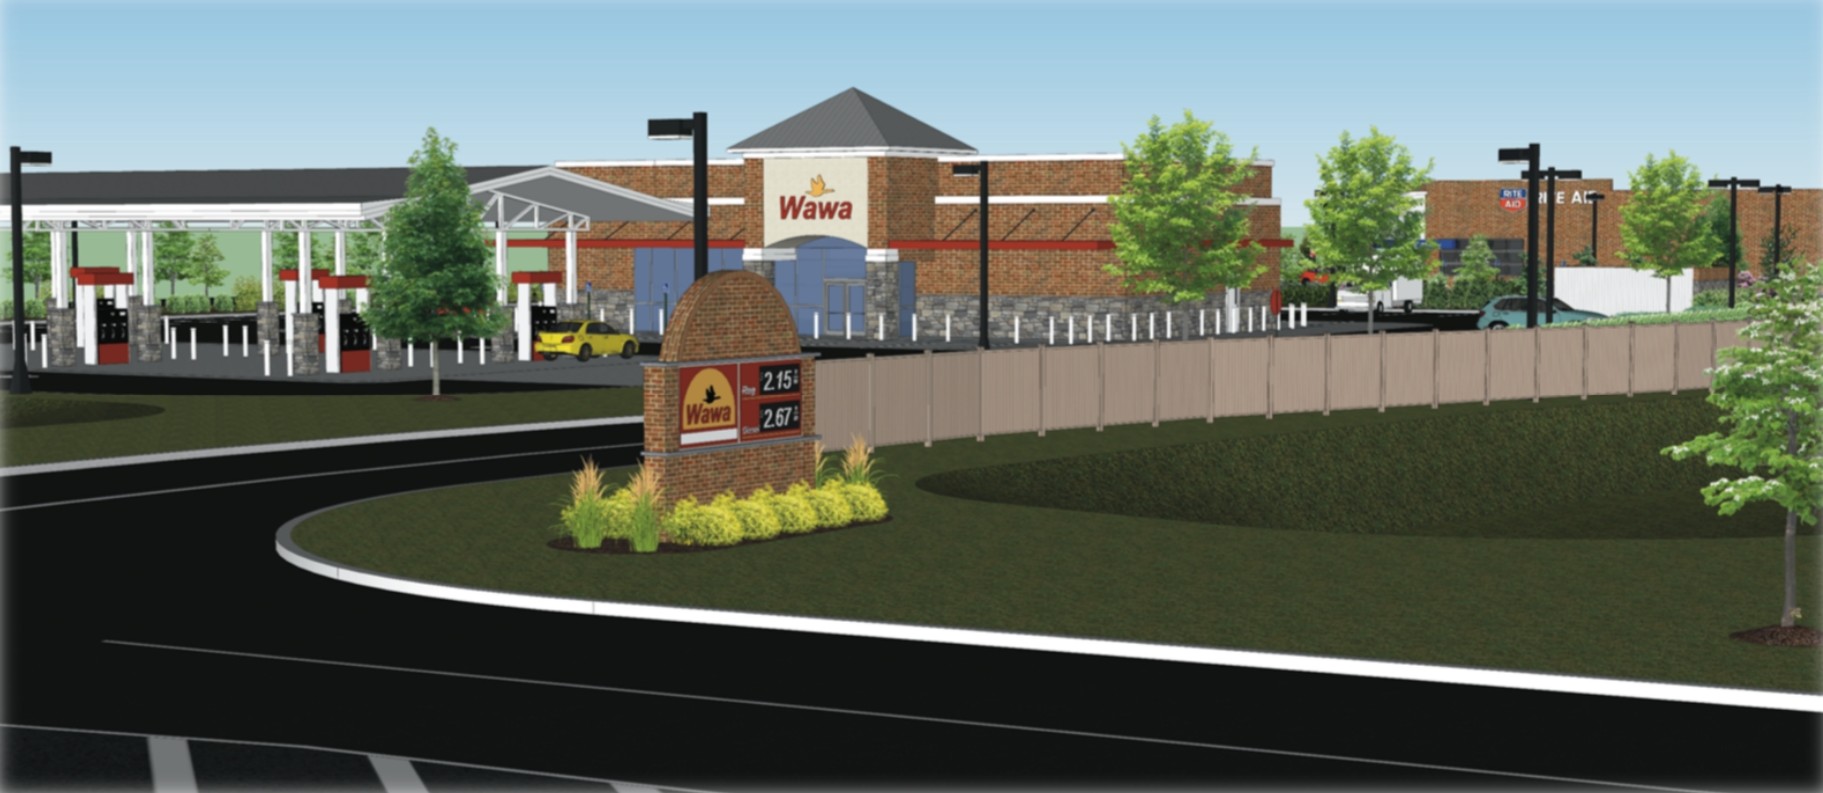 New Wawa needs Conditional Use Permit to store fuel in Titusville’s ‘Area of Concern’